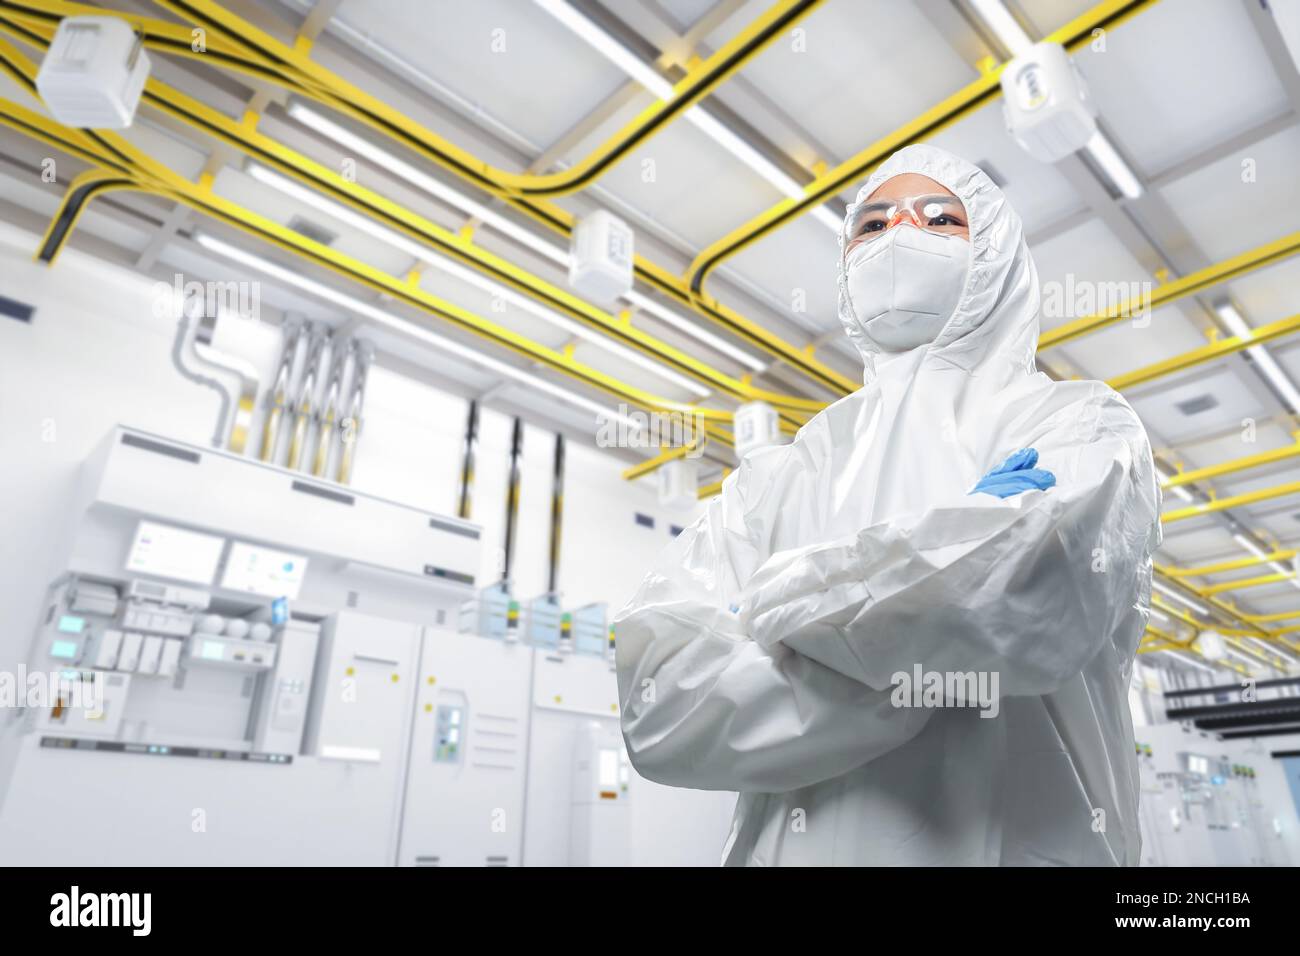 Worker or engineer wears protective suit or white coverall suit work in semiconductor manufacturing factory Stock Photo